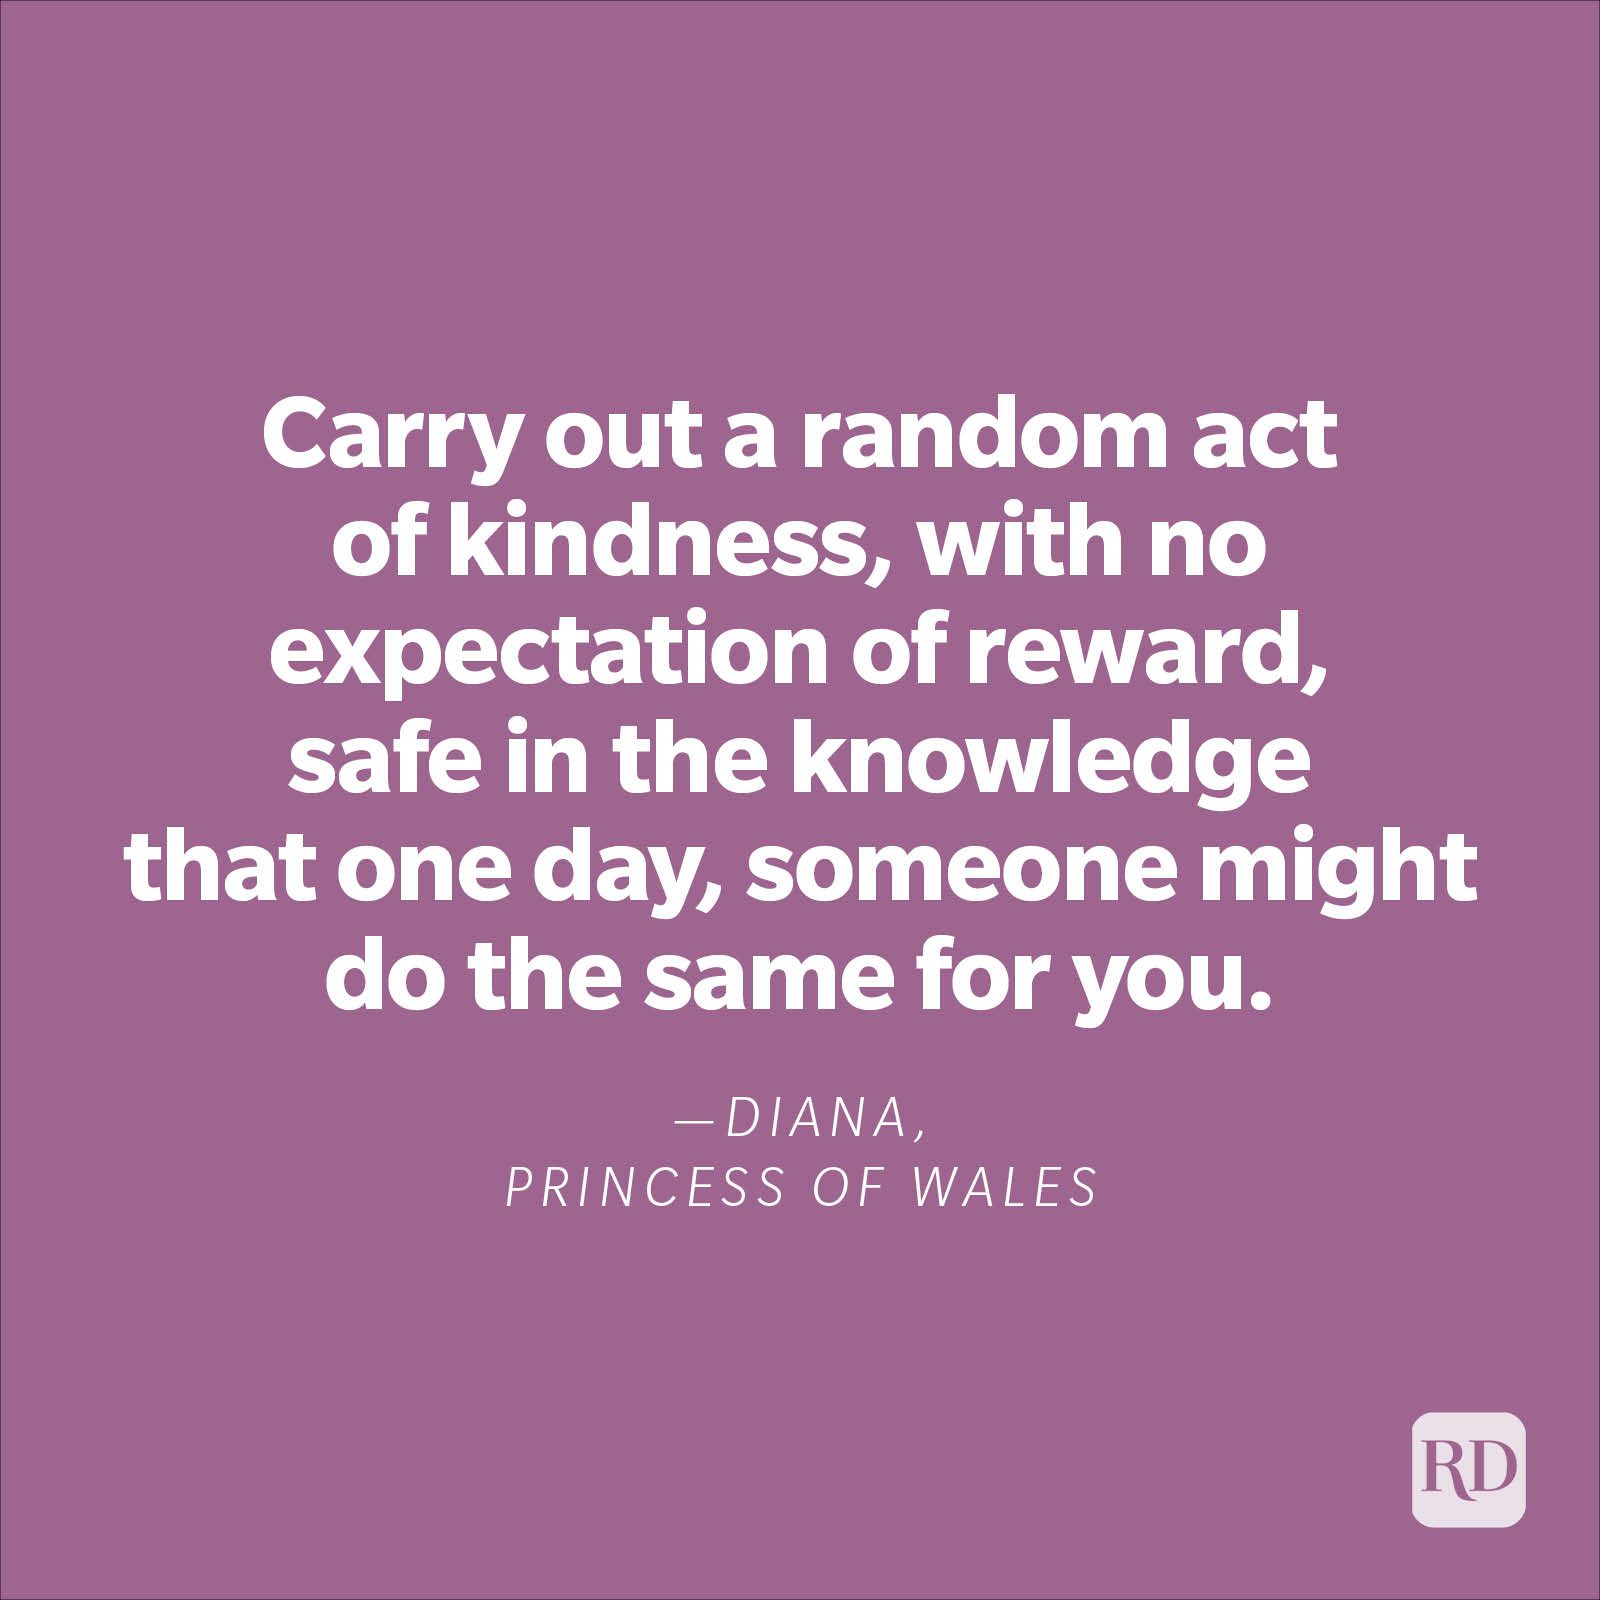 "Carry out a random act of kindness, with no expectation of reward, safe in the knowledge that one day, someone might do the same for you."—Diana, Princess of Wales